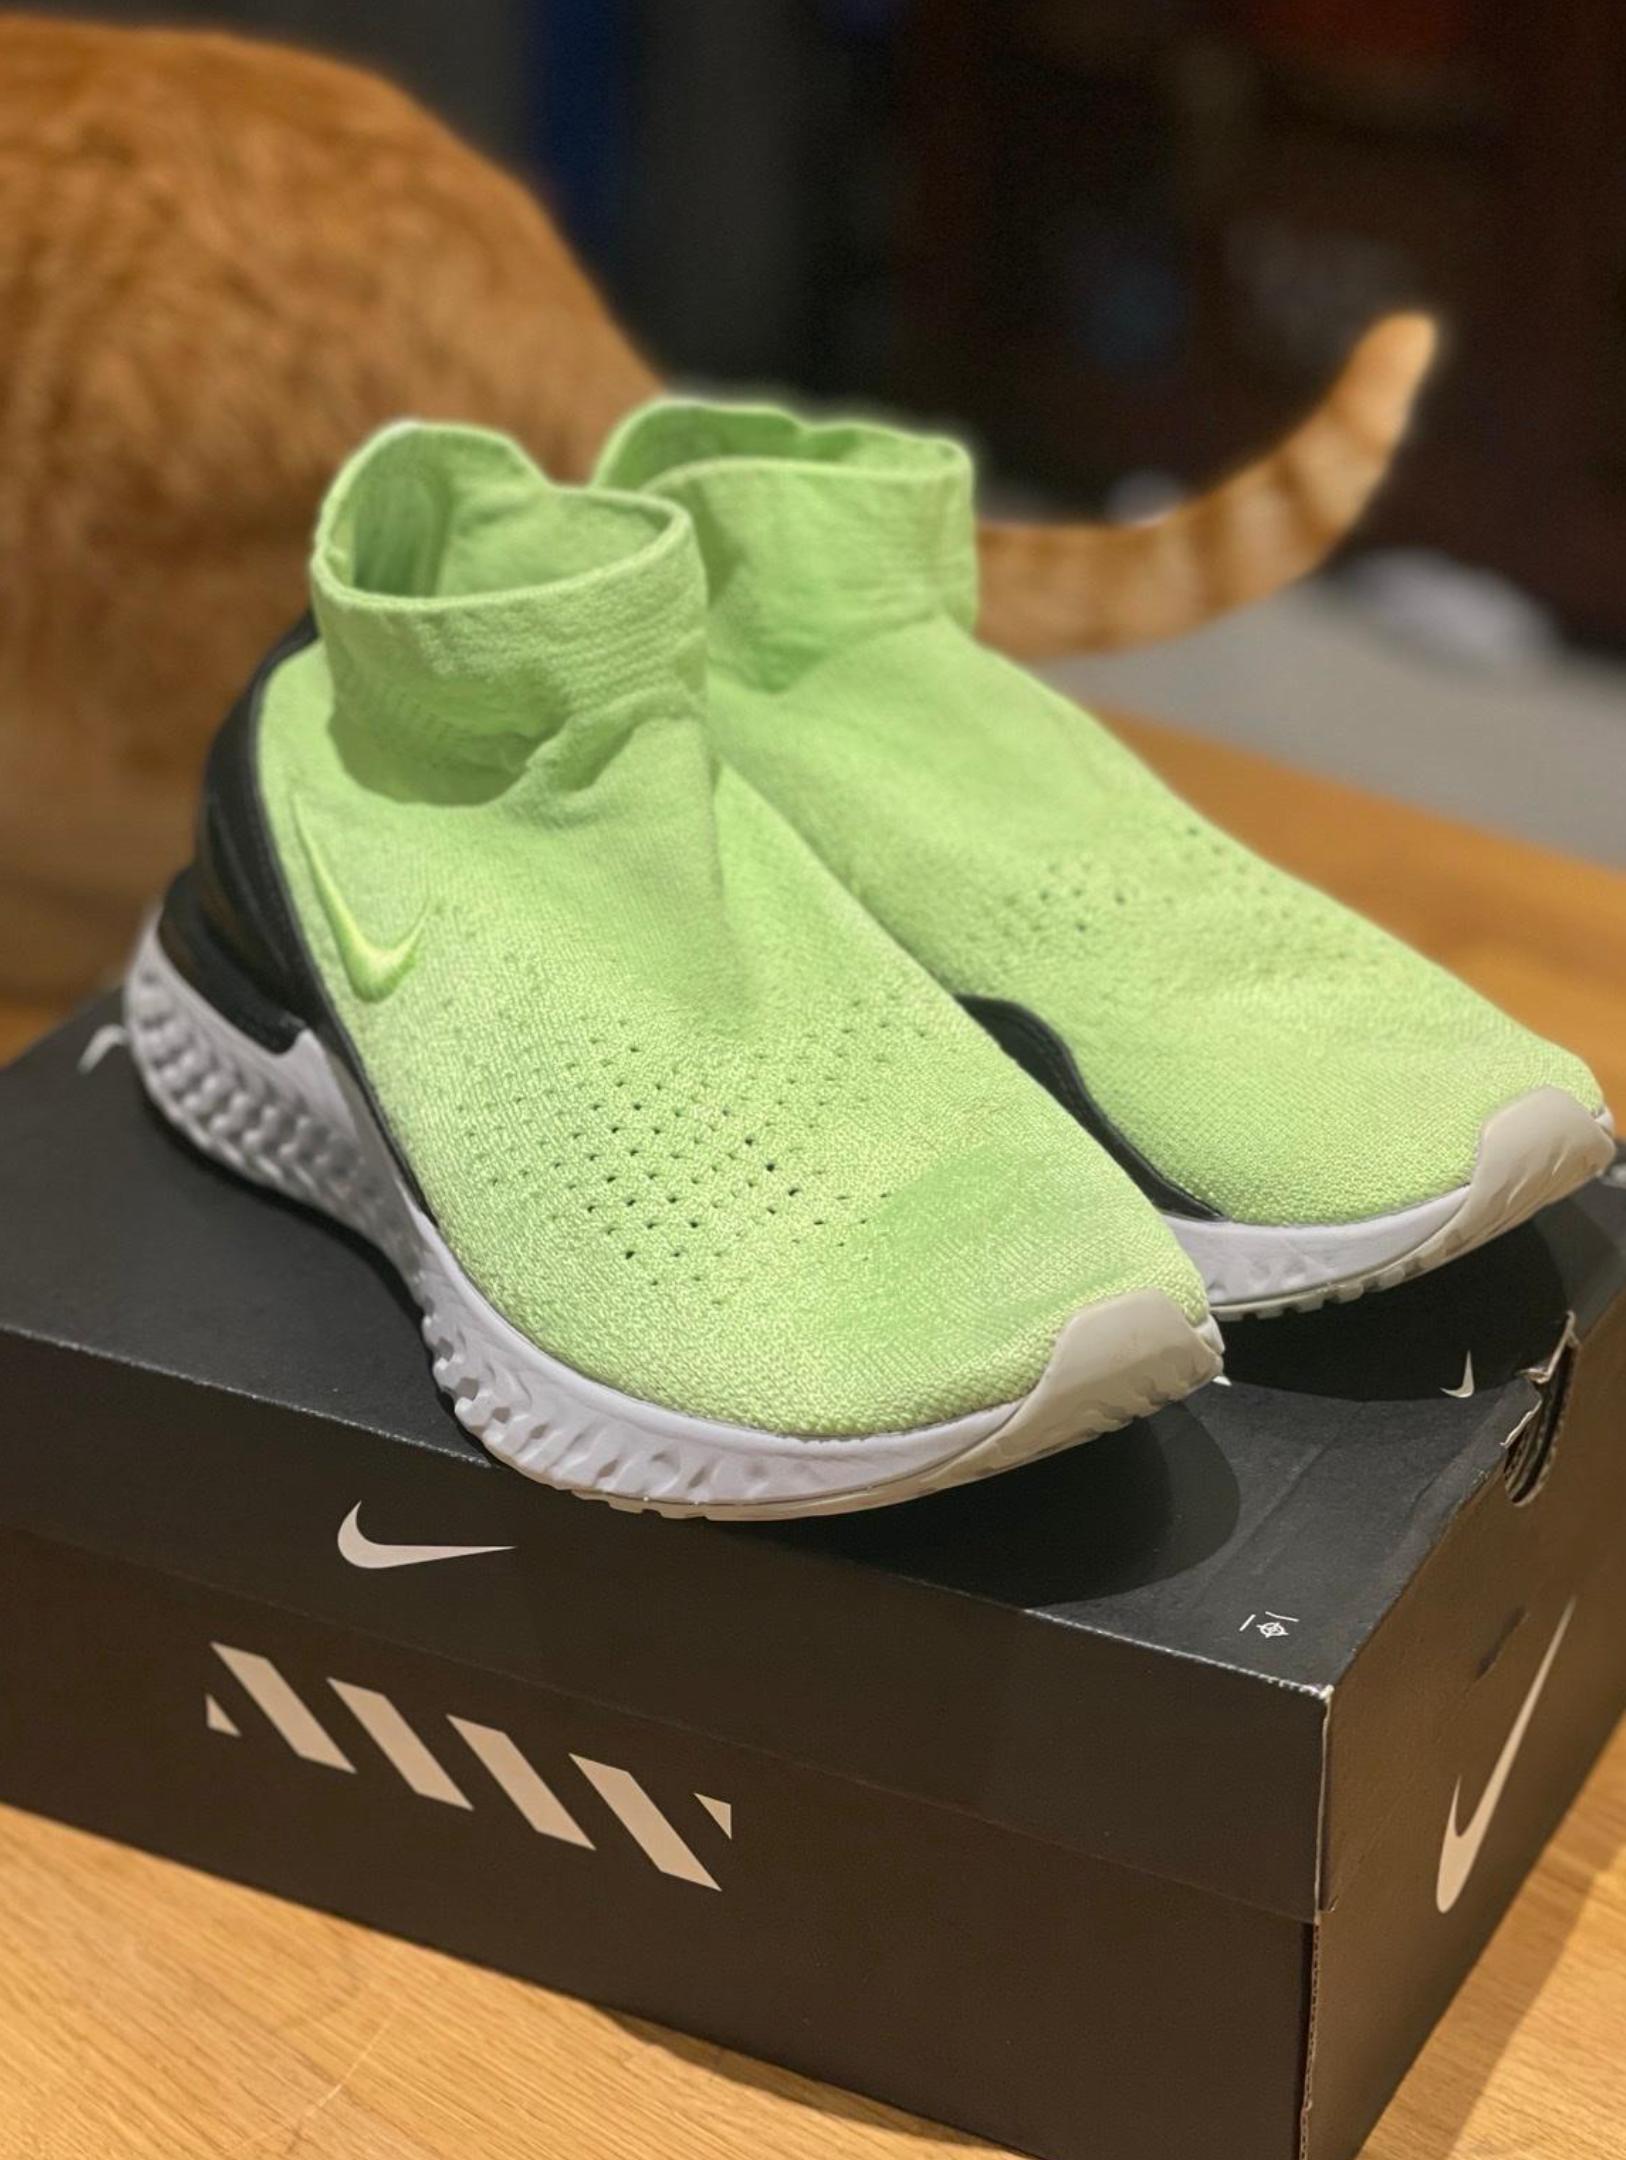 Nike Rise React Flynit Volt Trainer UK8.5 in NW9 London for £80.00 for ...